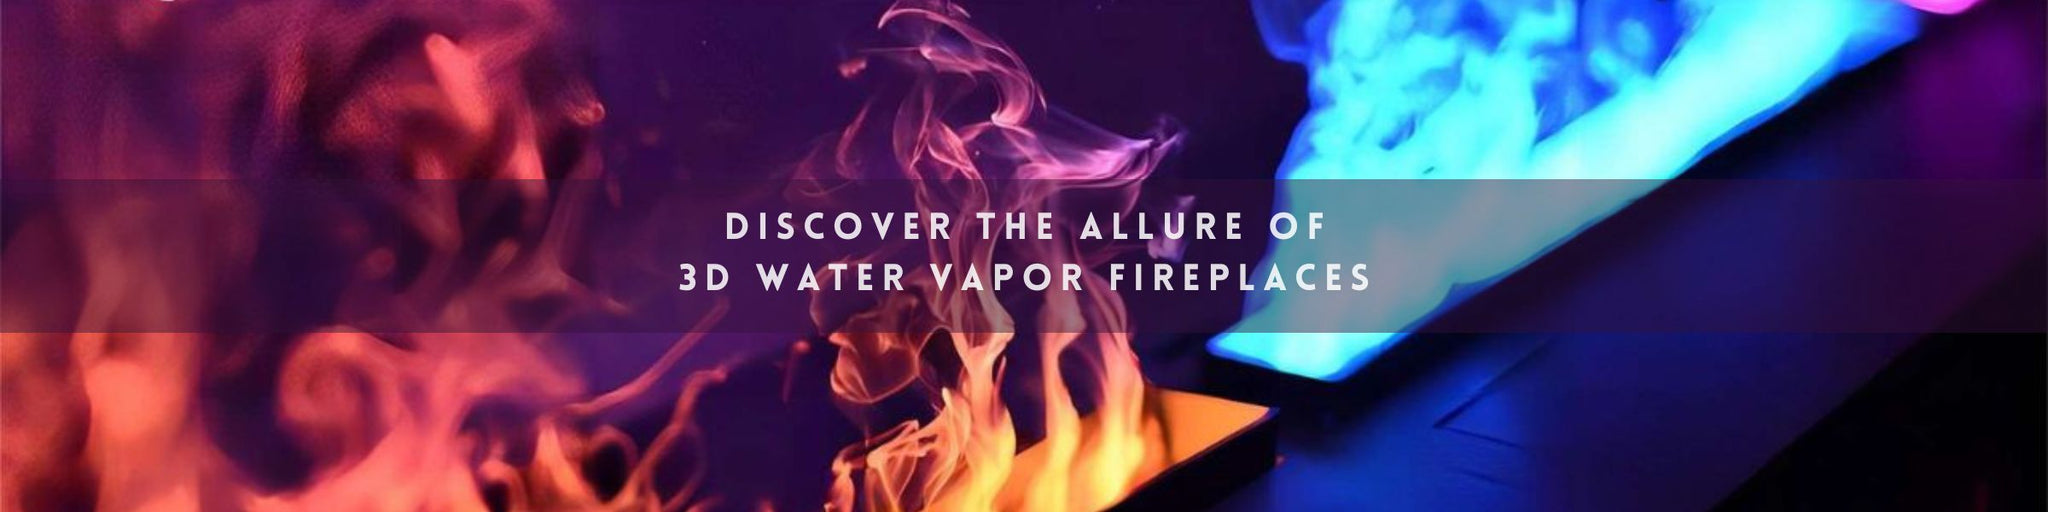 Immerse Yourself in Luxury: Discover the Allure of 3D Water Vapor Fireplaces